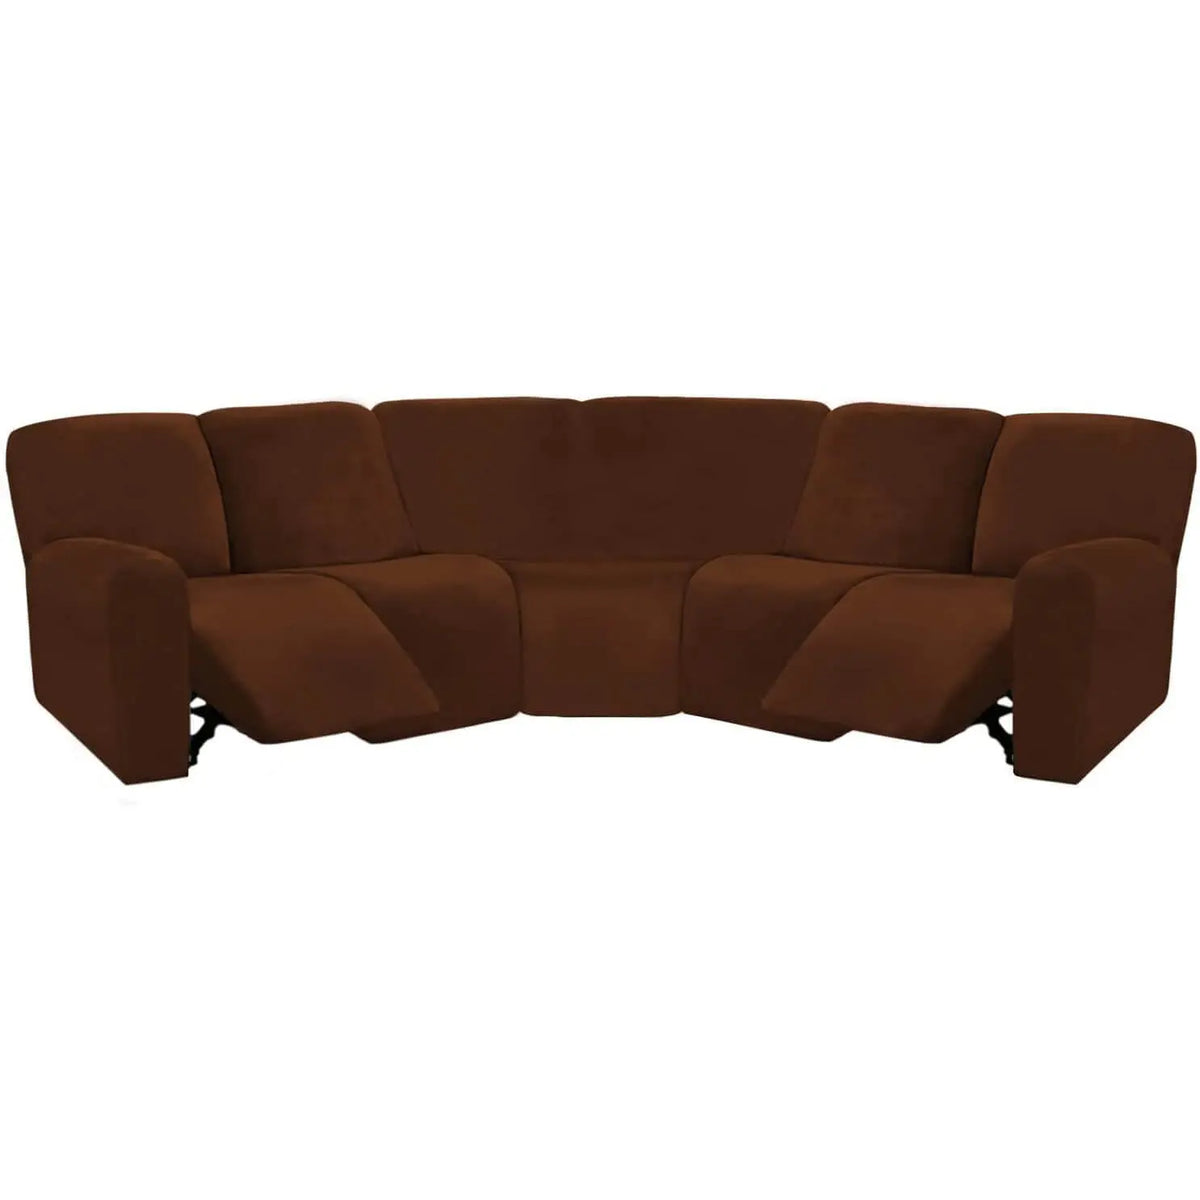 Crfatop 5-seater L Shape Sofa Cover with Recliner Brown